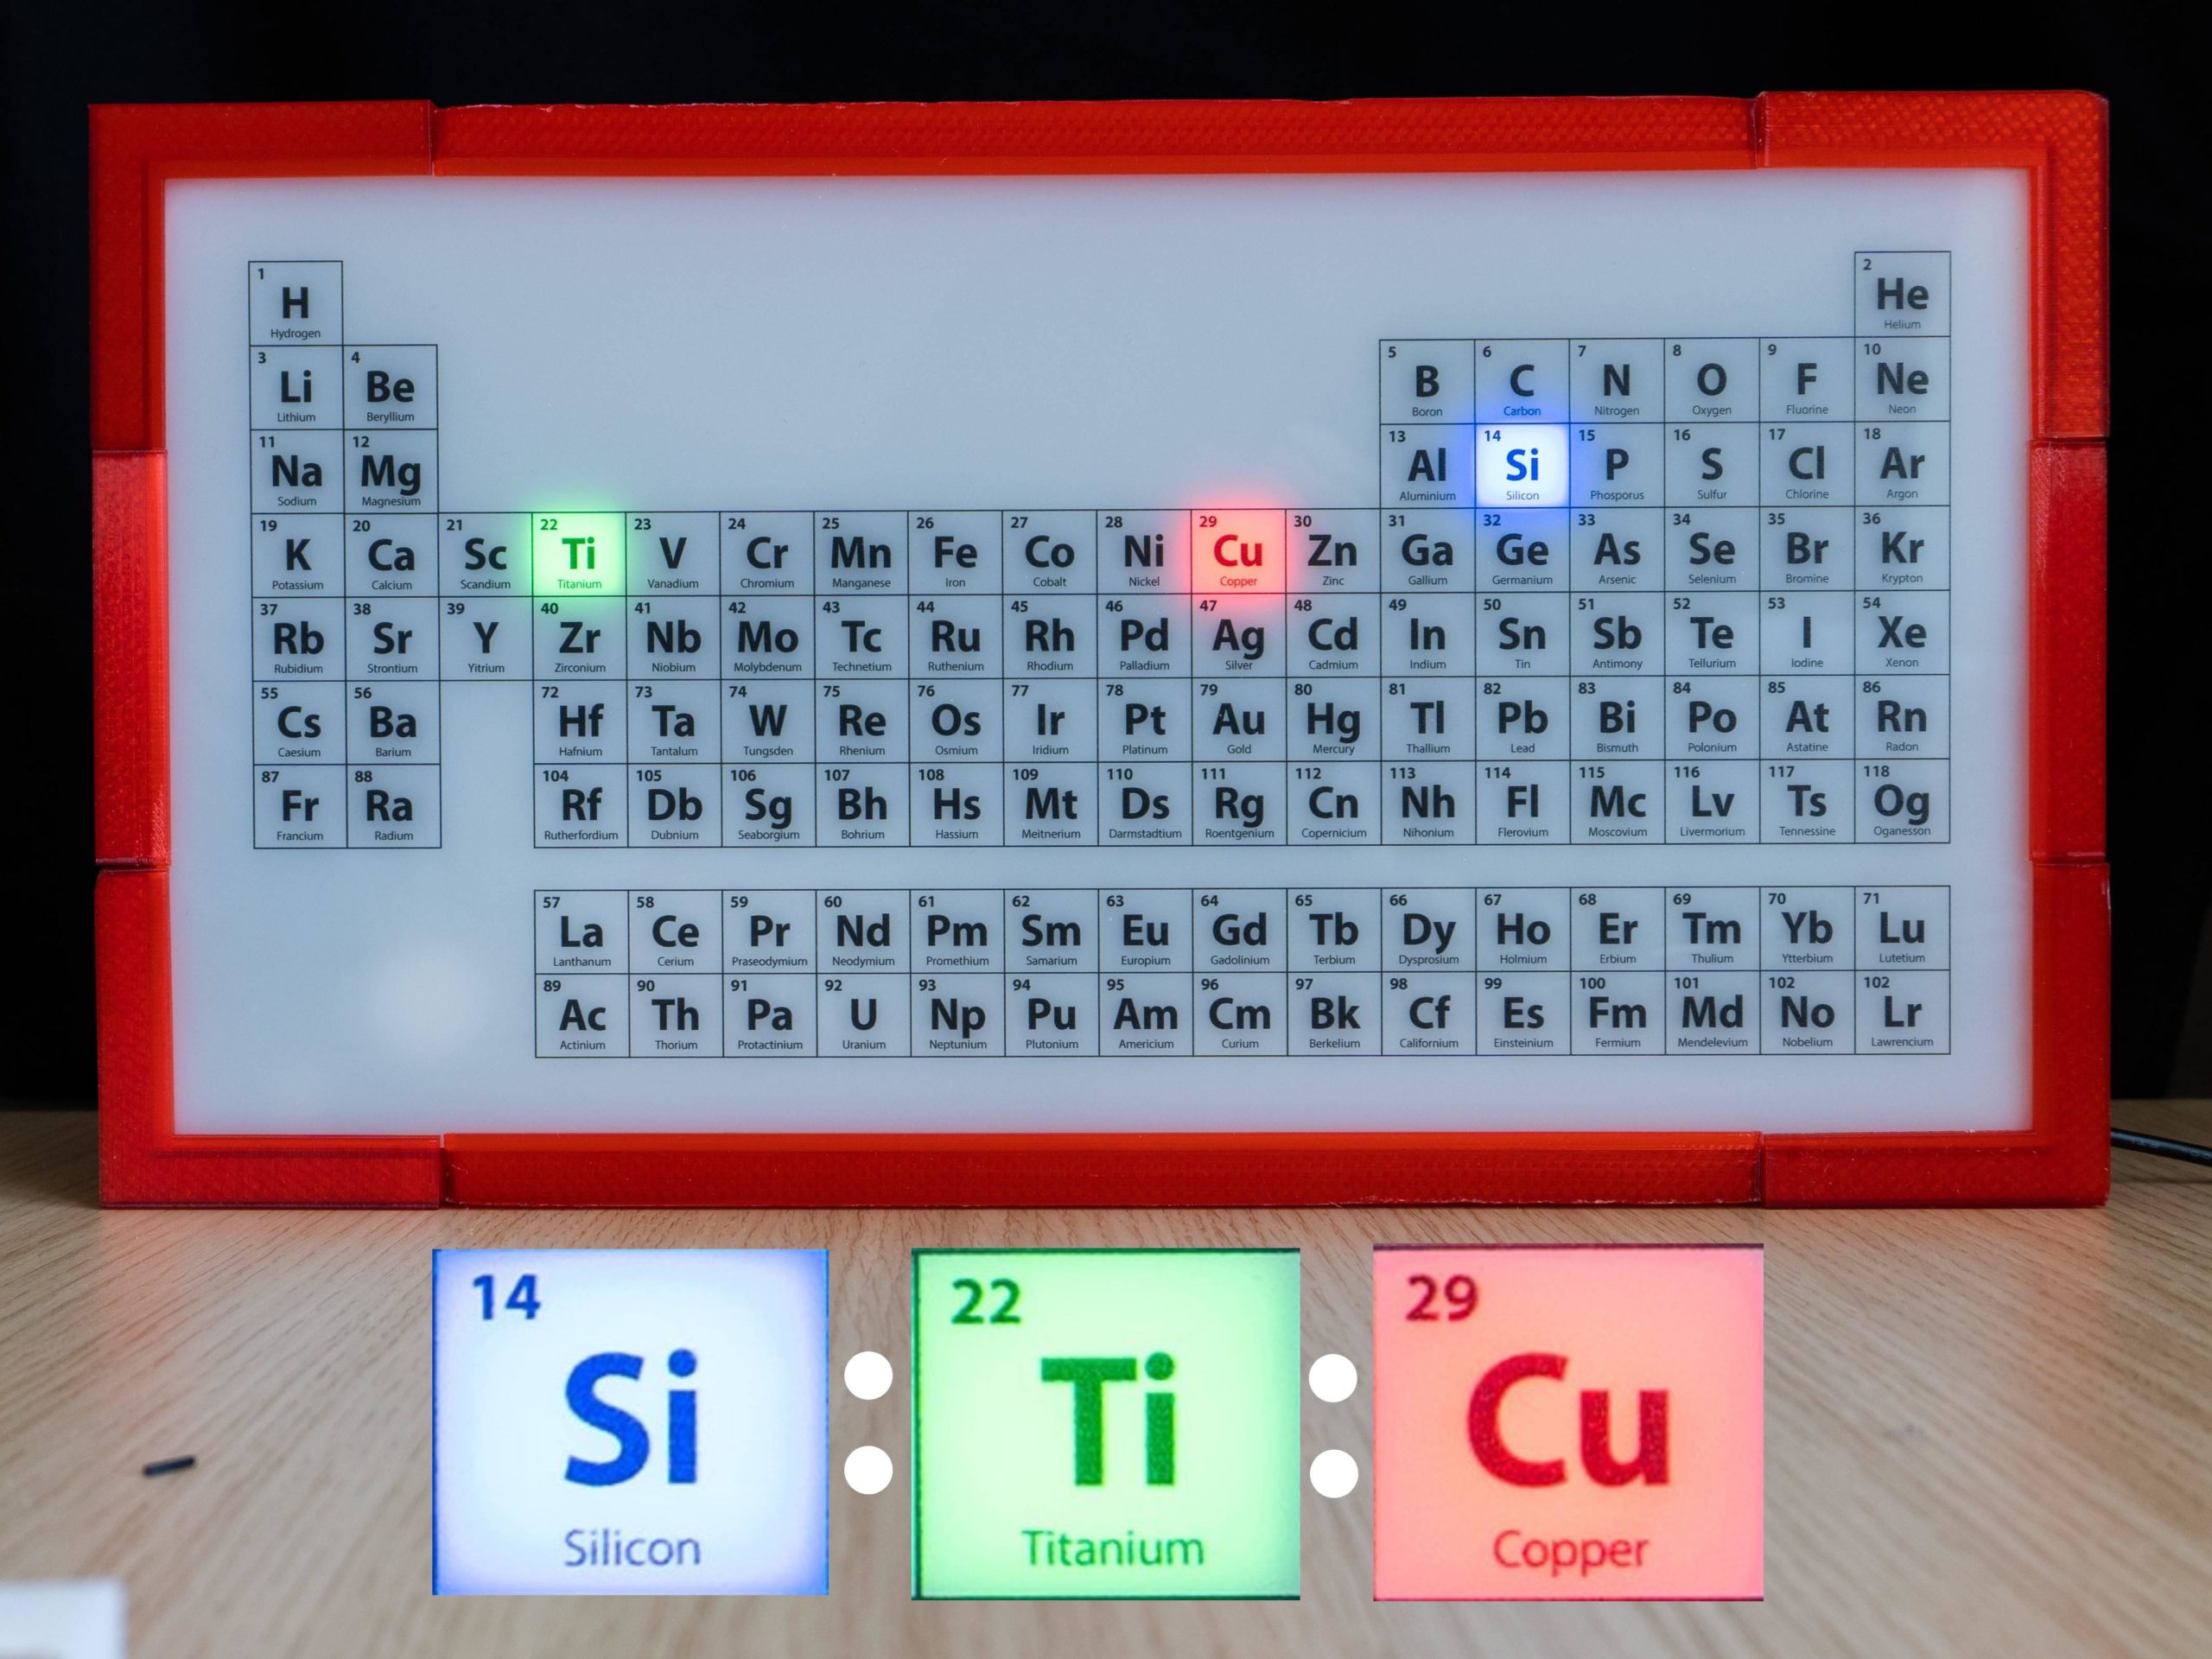 The Periodic Desk Clock oozes nerdy appeal